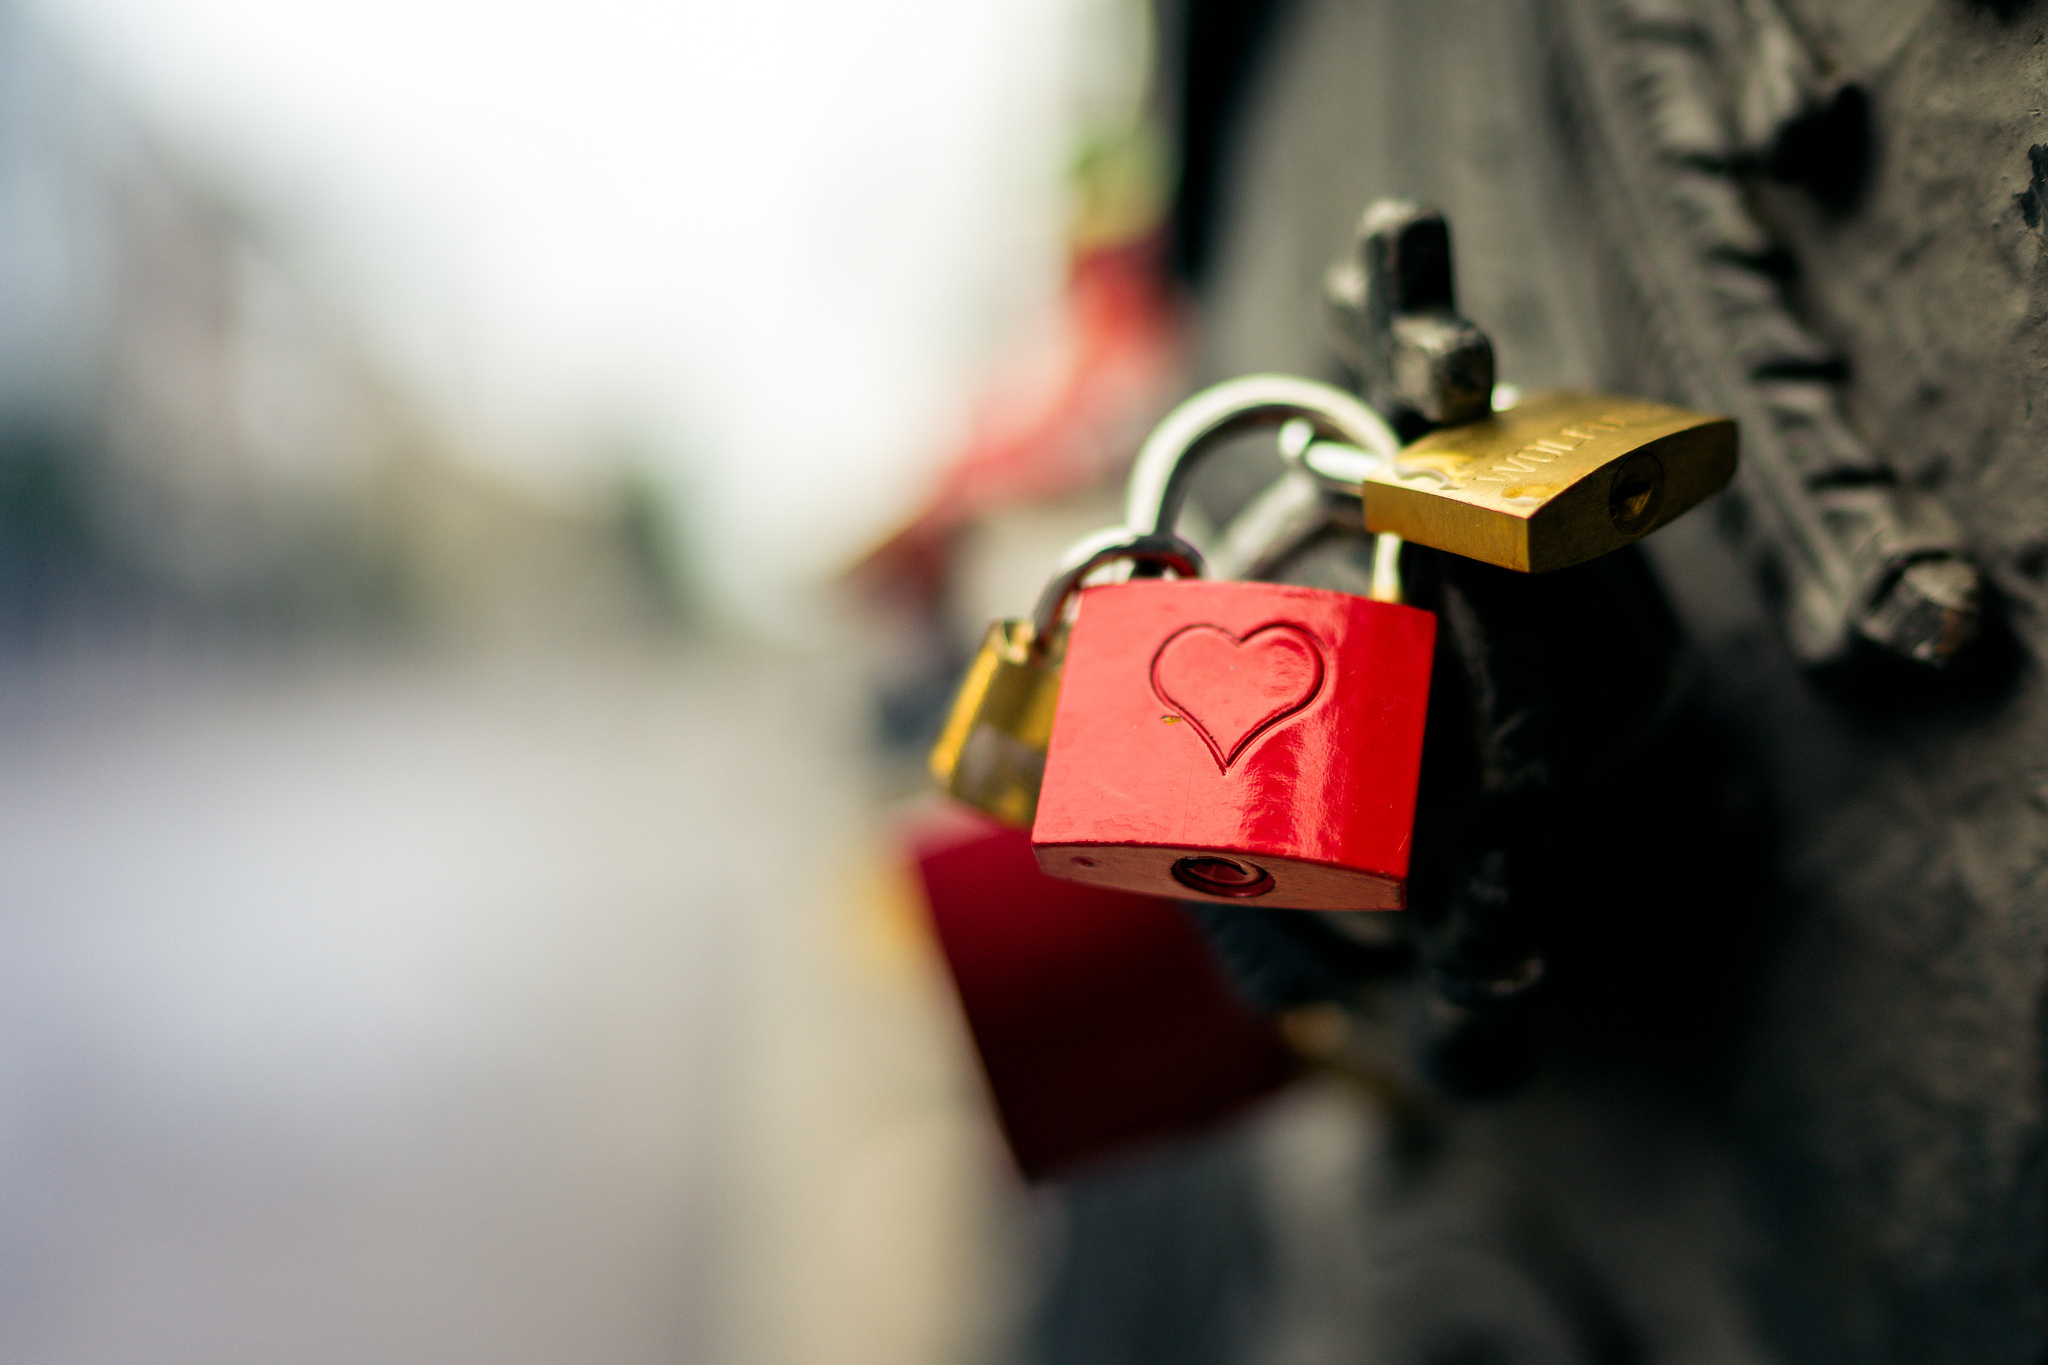 Download background man made, lock, blur, close up, heart, romantic